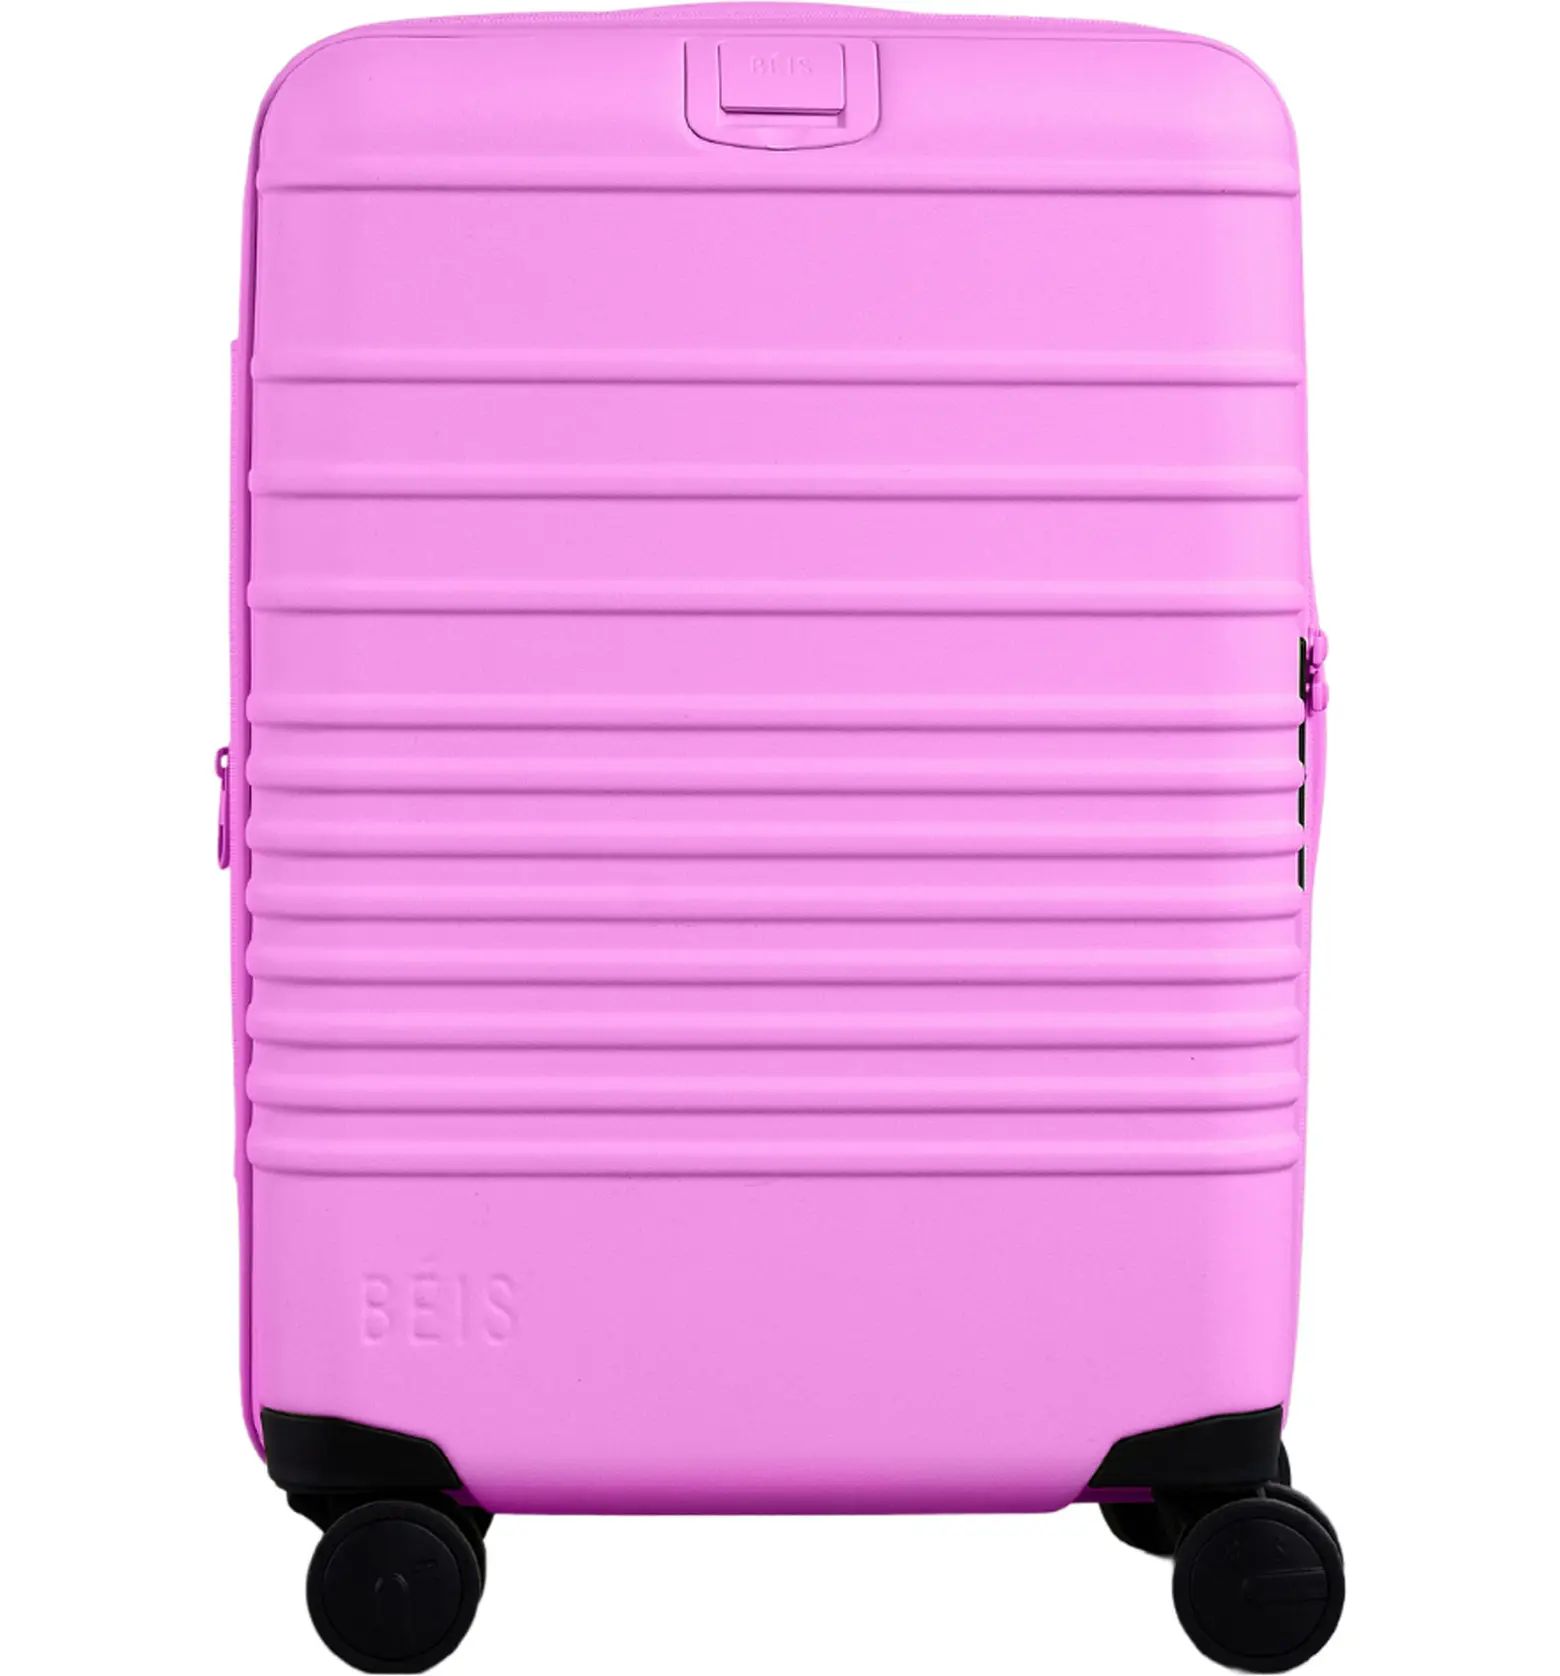 21-Inch Rolling Spinner Suitcase | Nordstrom